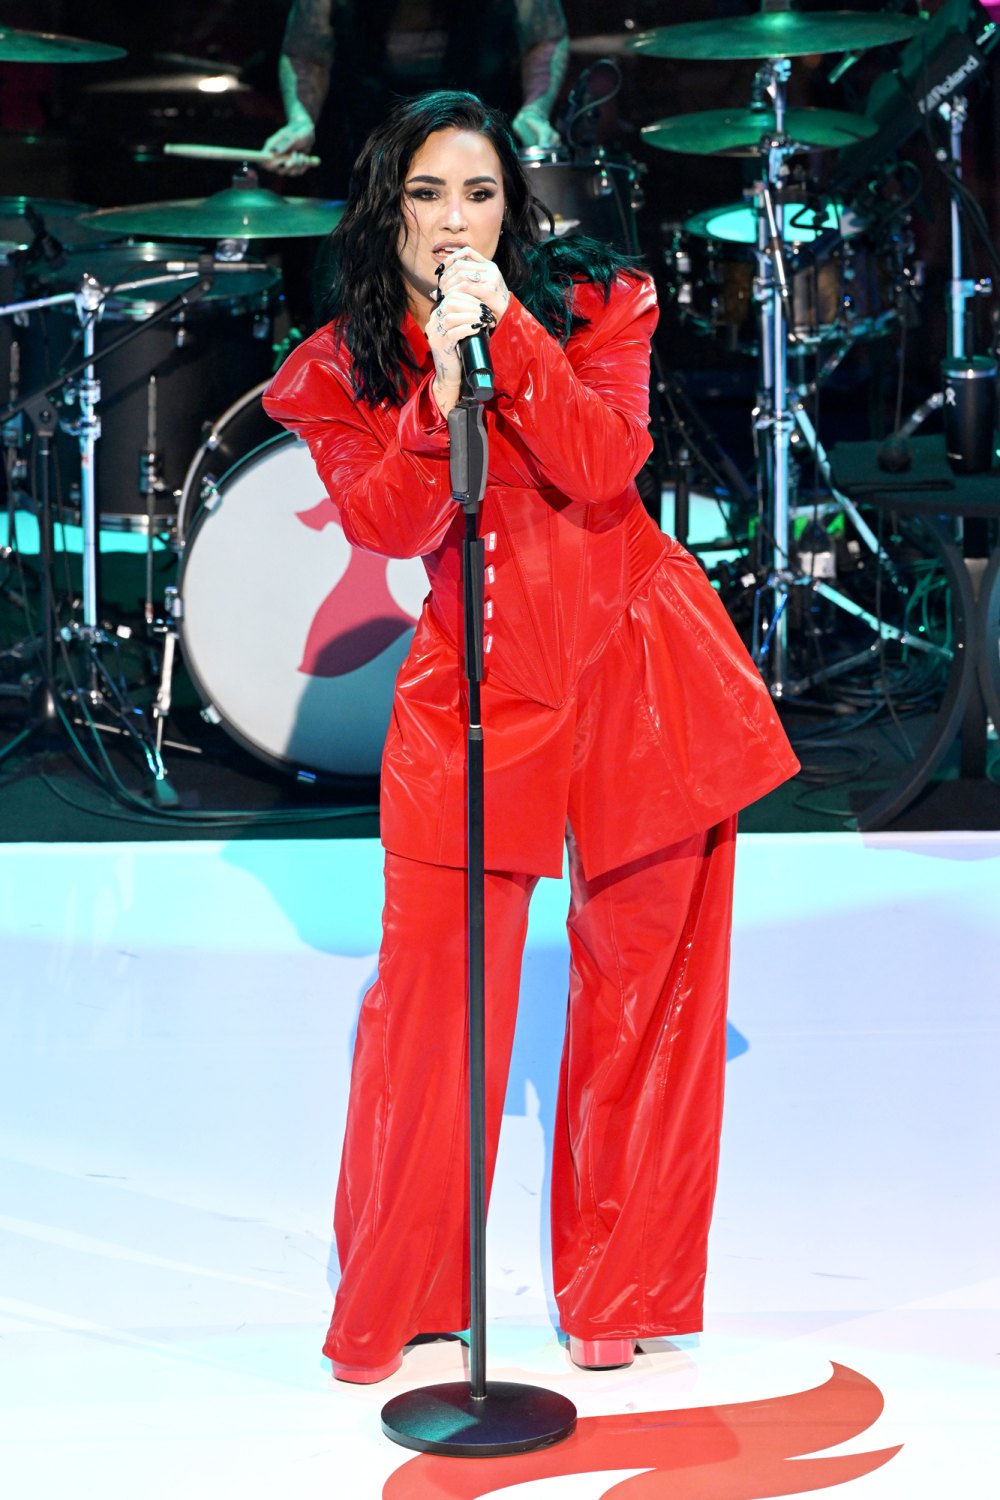 Demi Lovato at Red Dress Concert